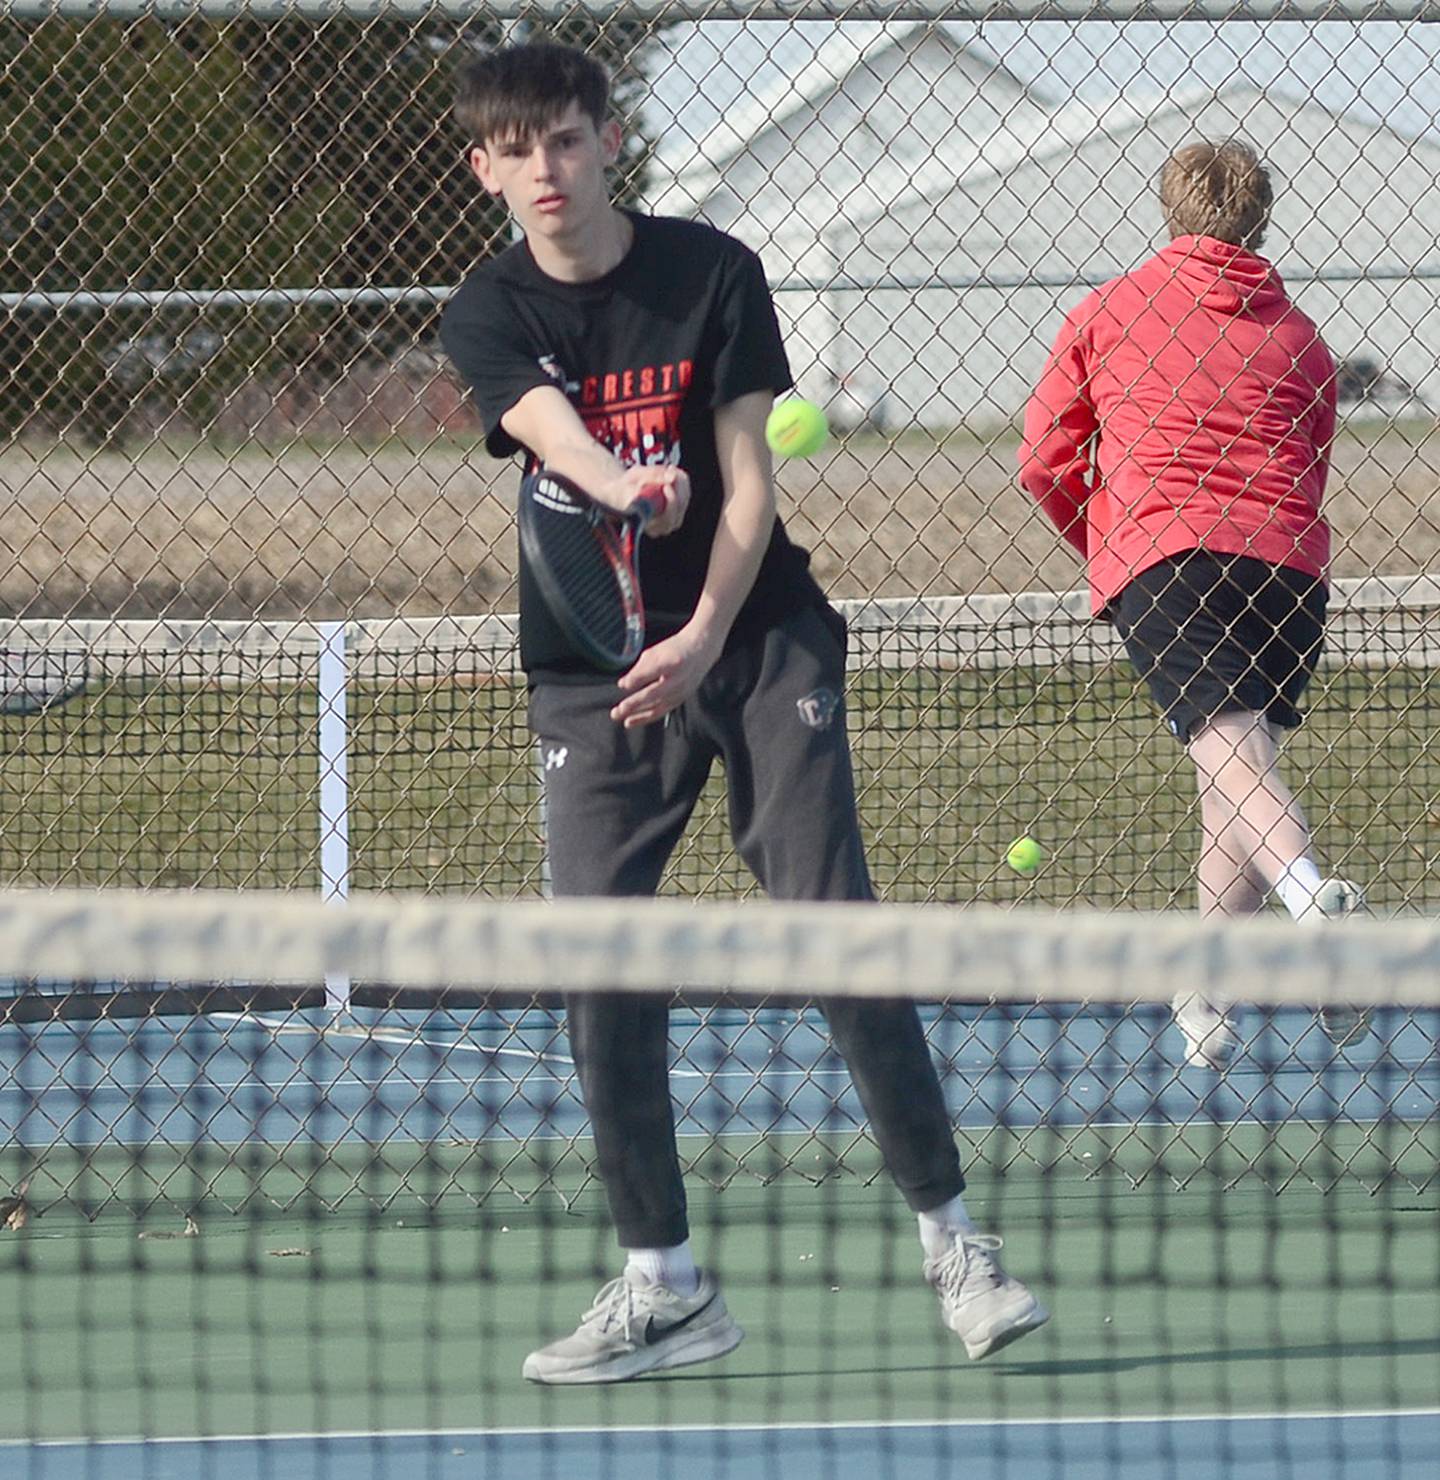 Creston's Gavin Millslagle hits a forehand shot against Audubon during his 8-3 victory at No. 2 singles on Friday. Millslagle also teamed with Lucas Rushing for an 8-4 win at No. 1 doubles.